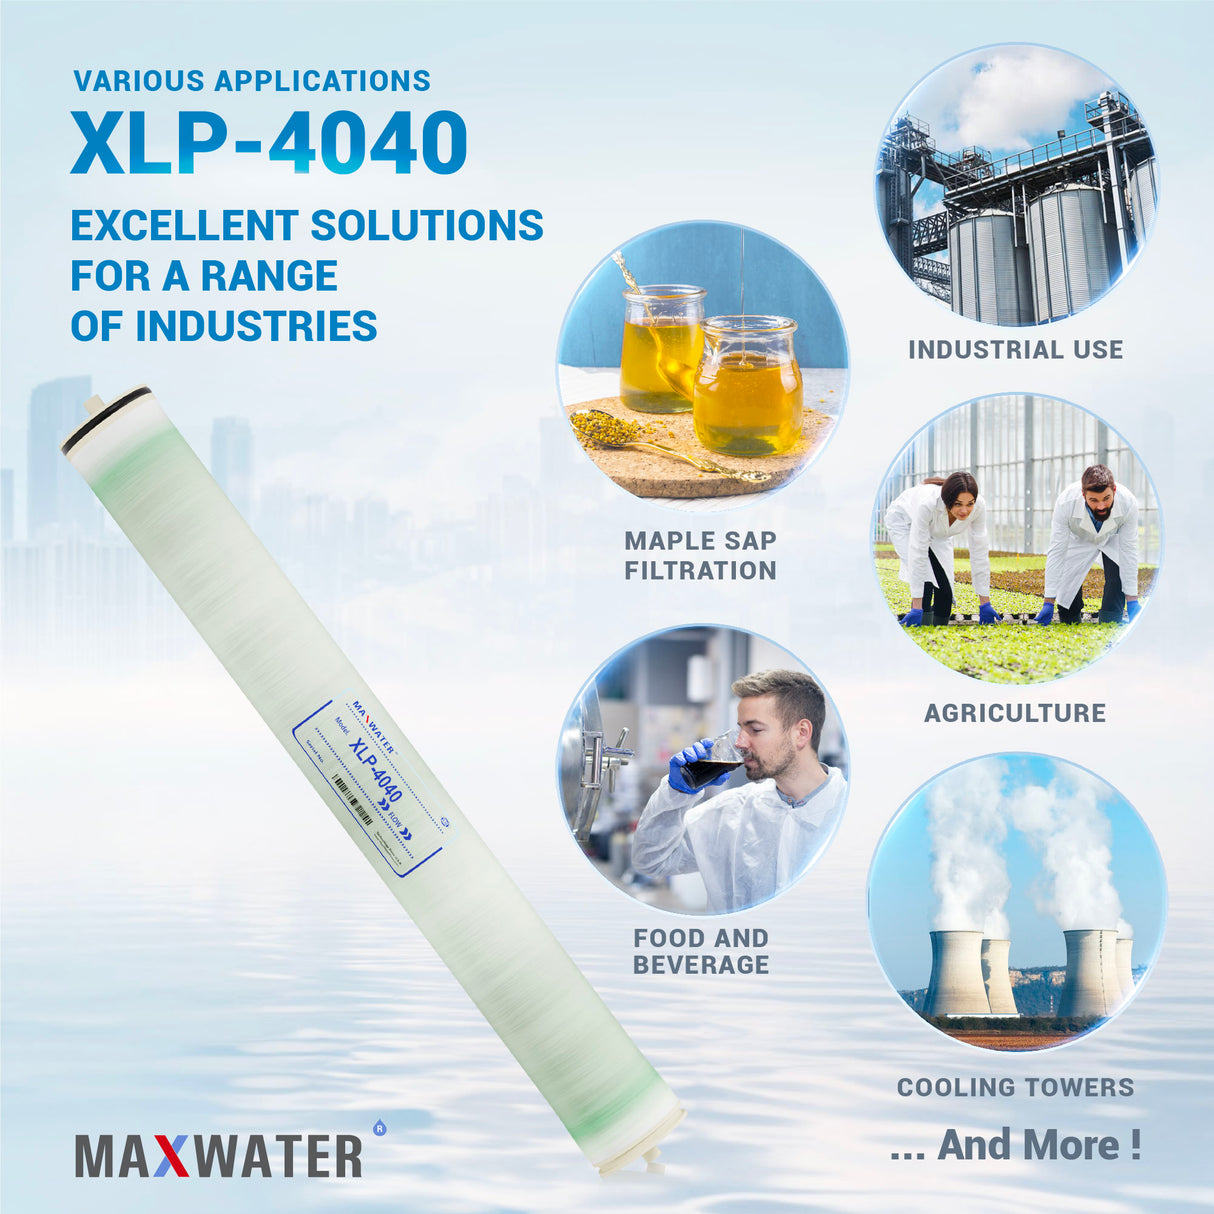 Reliable 4x40-inch RO membrane for extra low-pressure setups - superior XLP filtration technology.